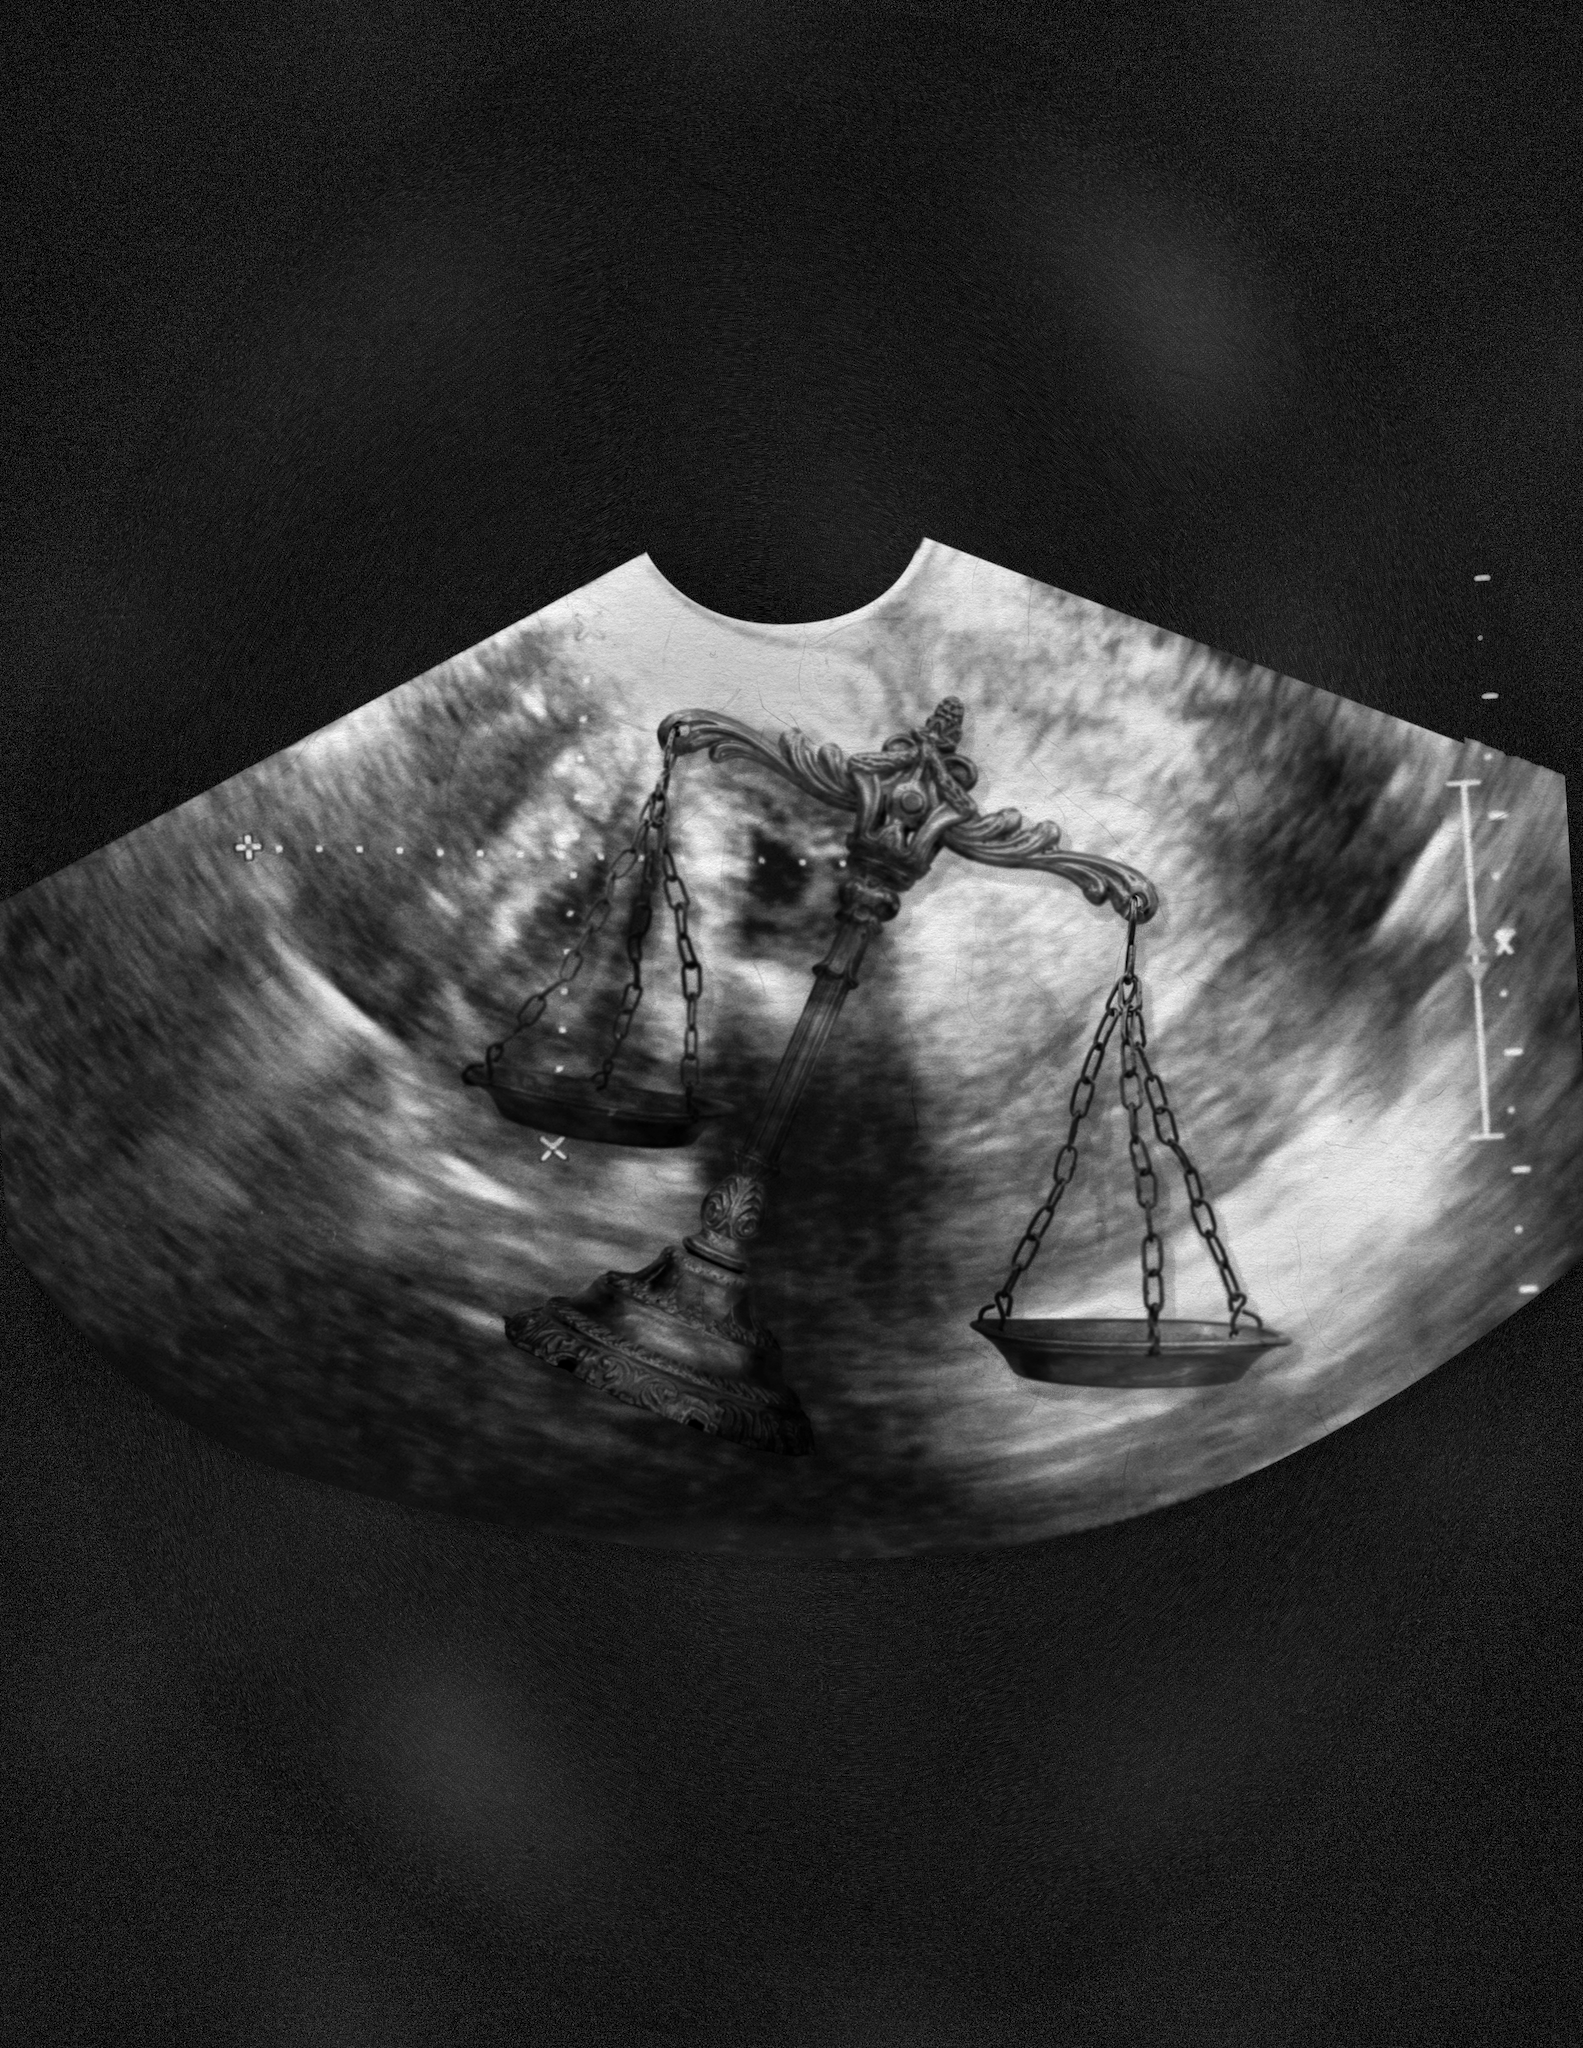 An illustration combining a sonogram of a womb with the image of a balancing scale, as if the scales of justice are inside the reproductive organ.